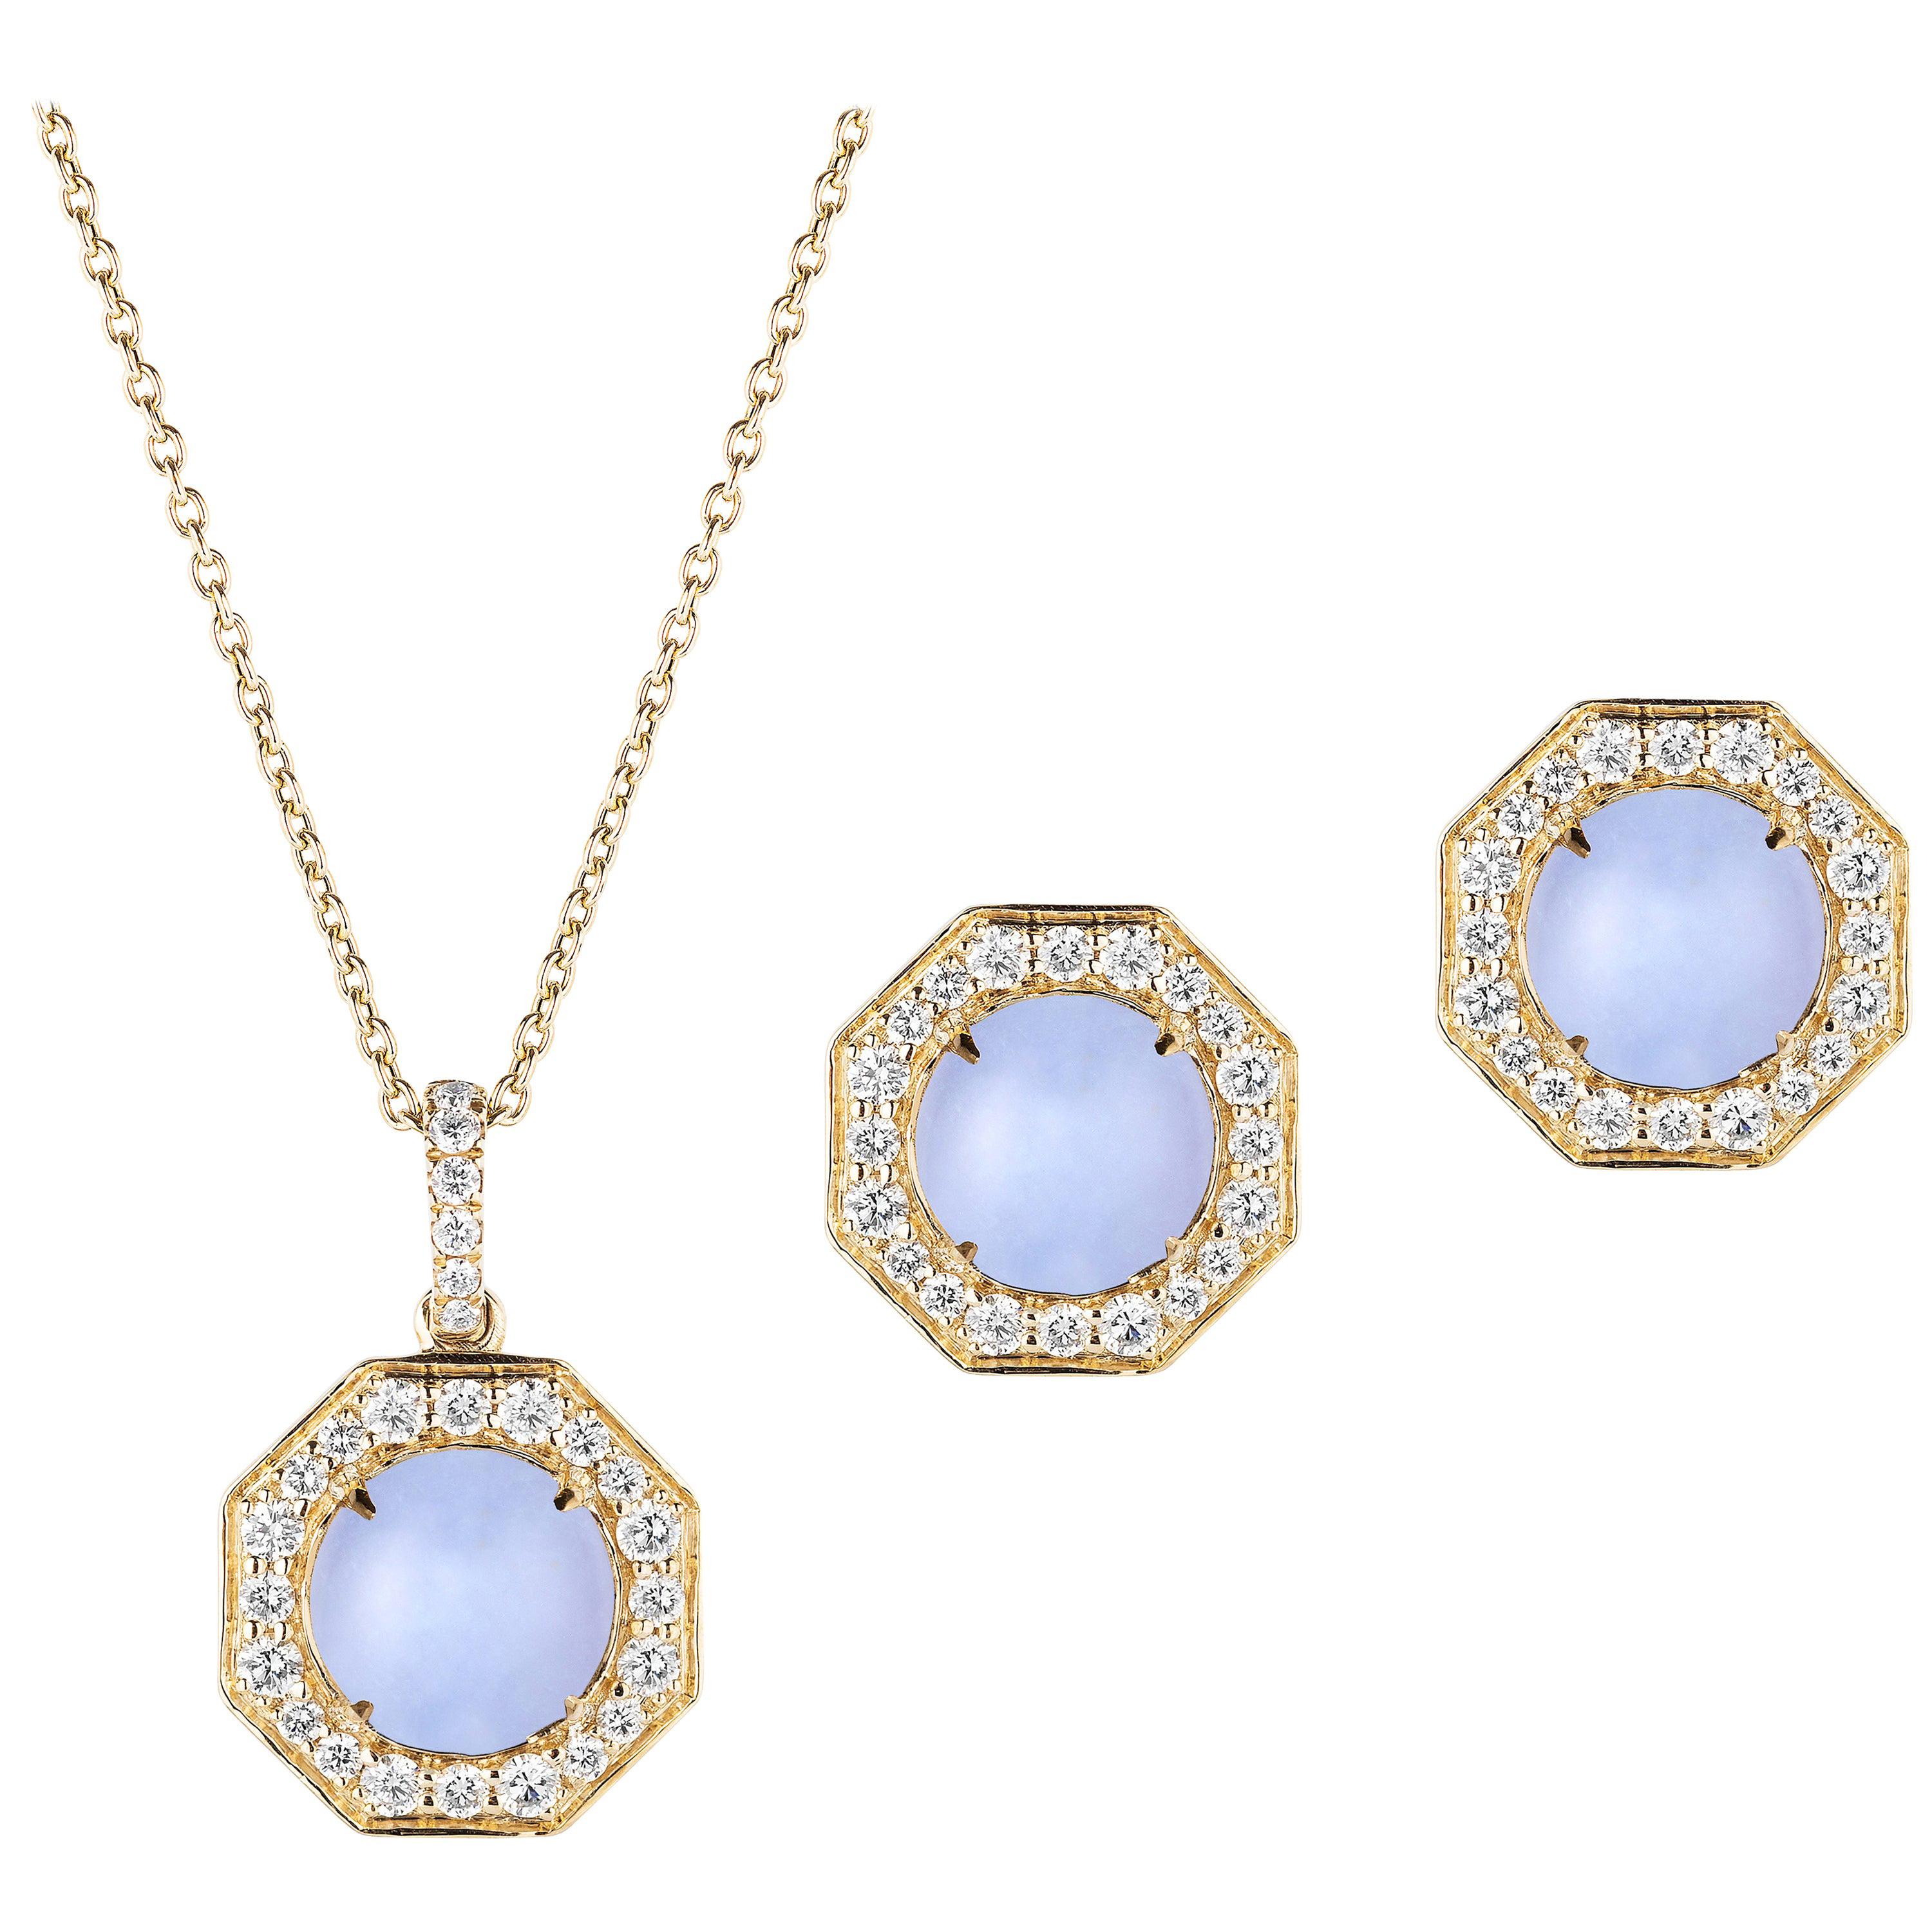 Goshwara Blue Chalcedony Cabochon with Diamond Pendant and Earrings